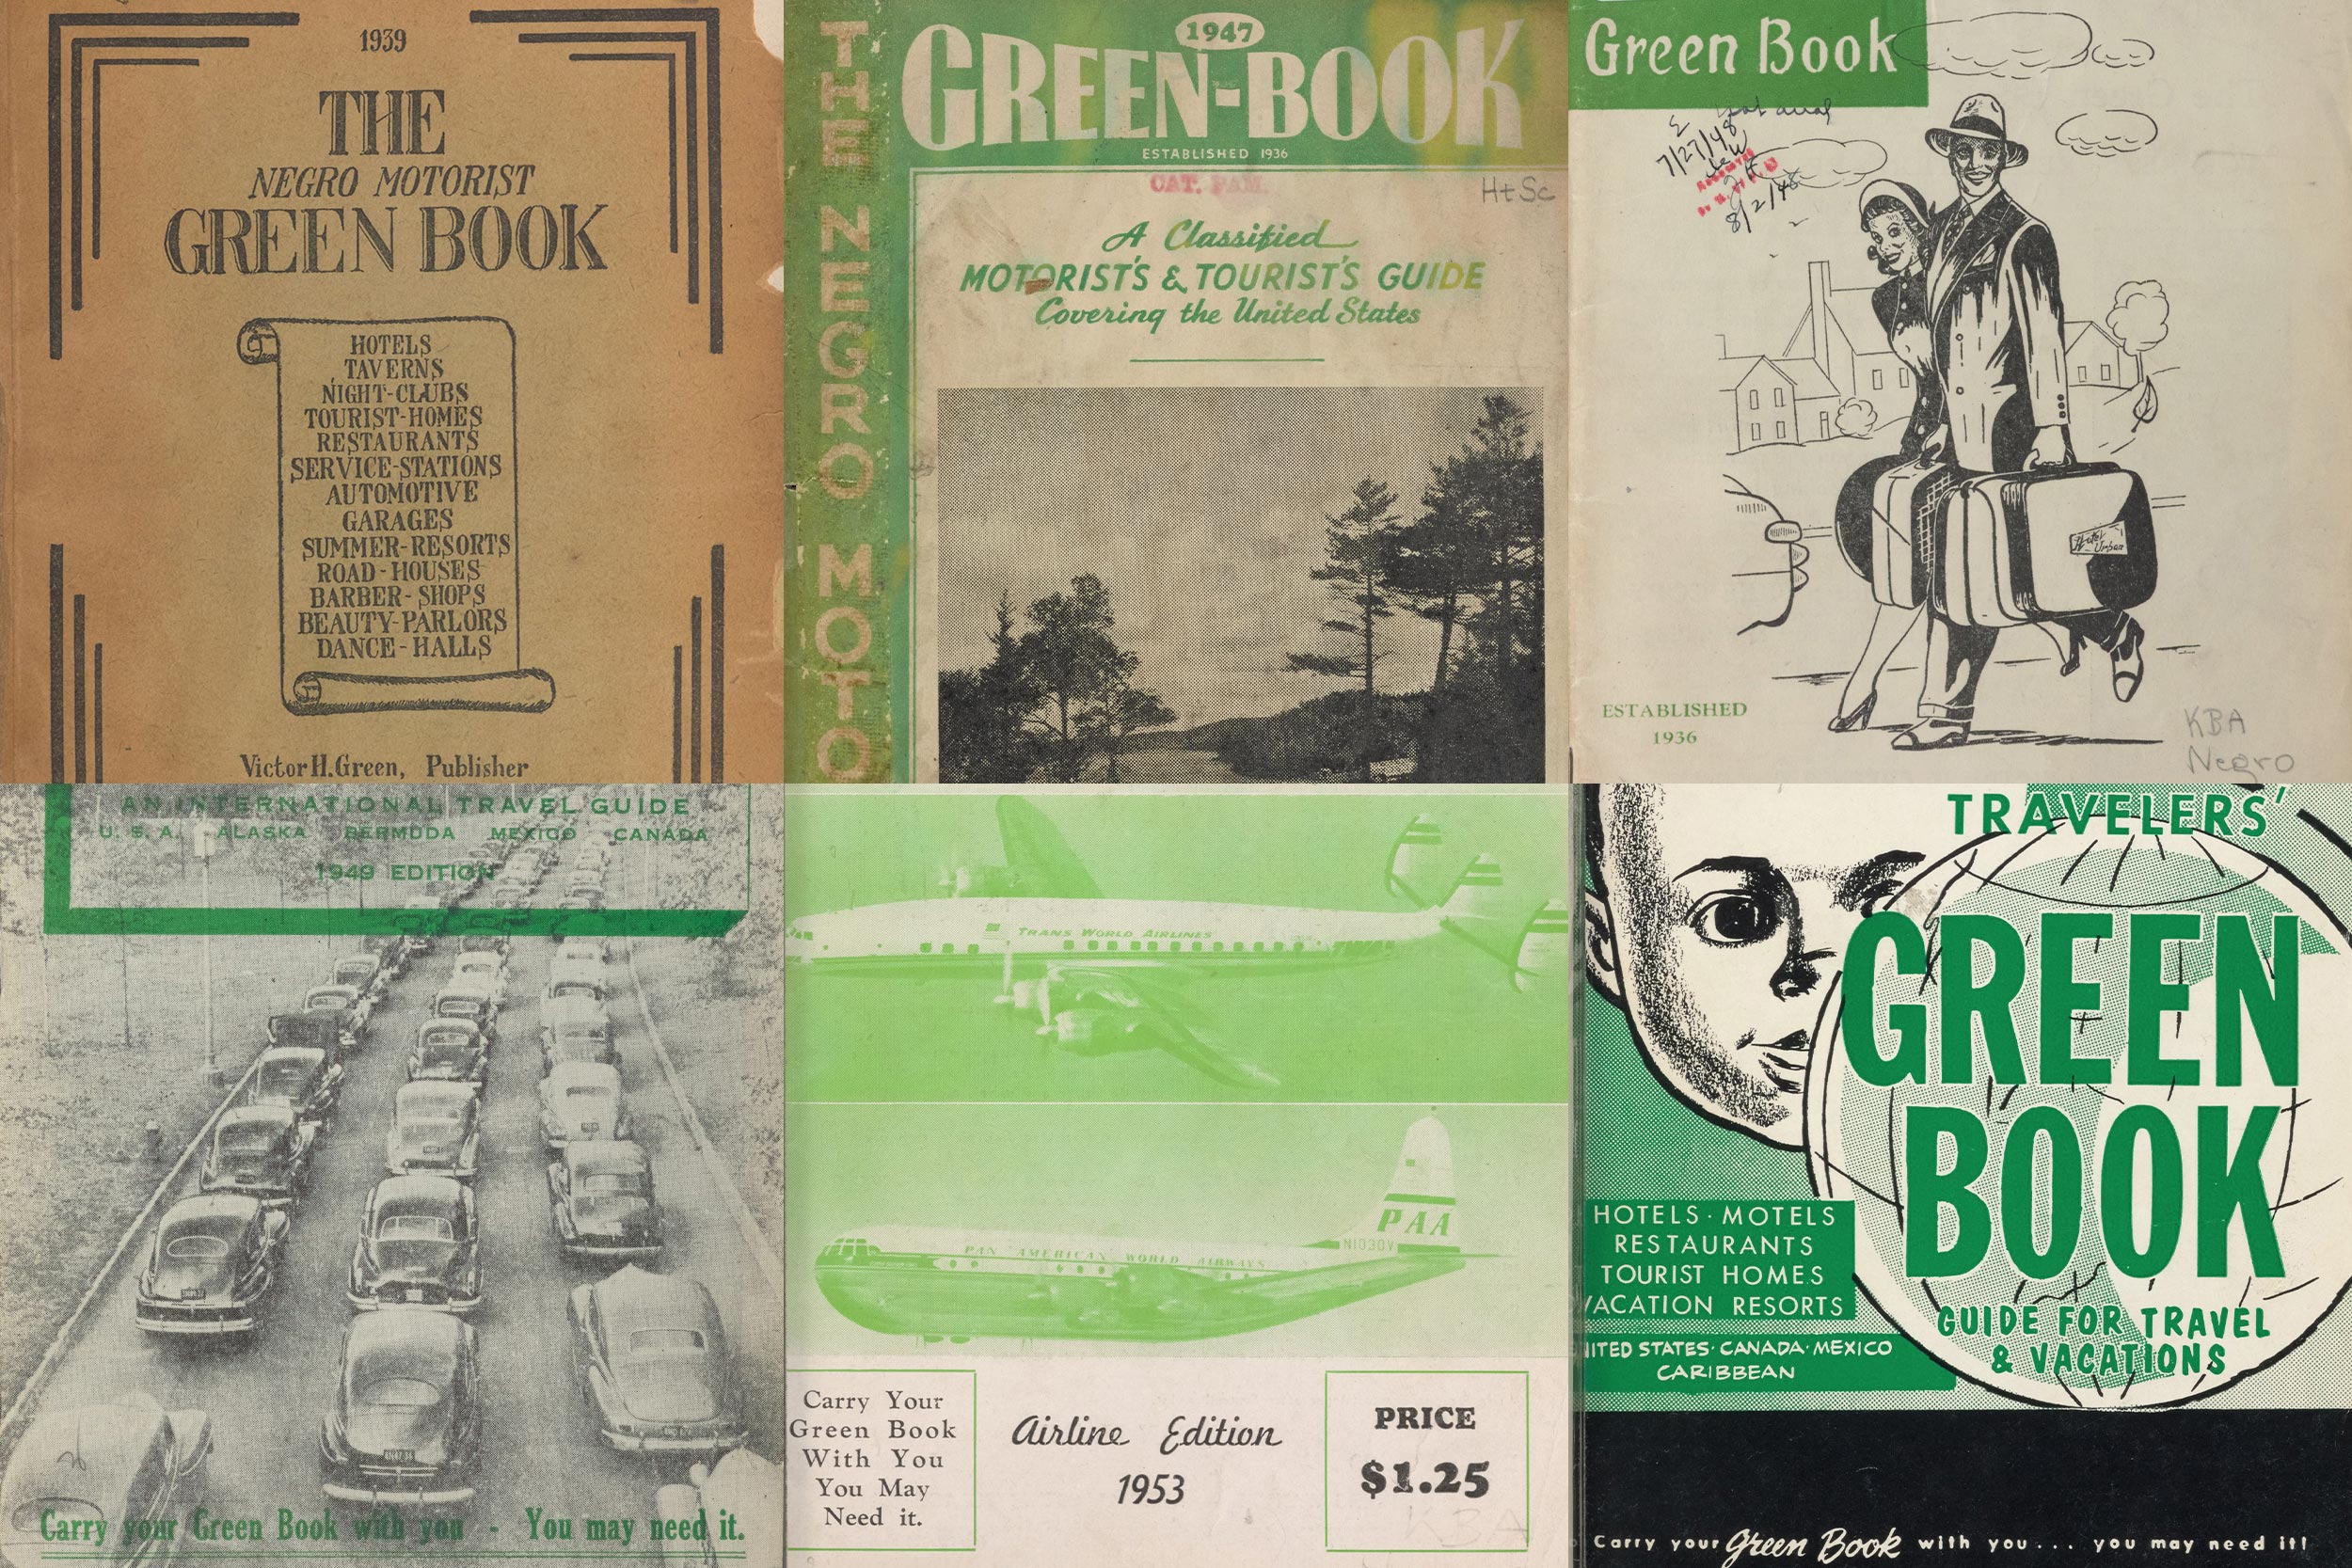 The architectural historians researching the sites listed in “The Negro Traveler’s Green Book” would like to raise awareness and therefore protect them. (Collage by Alex Angelich, University Communications)